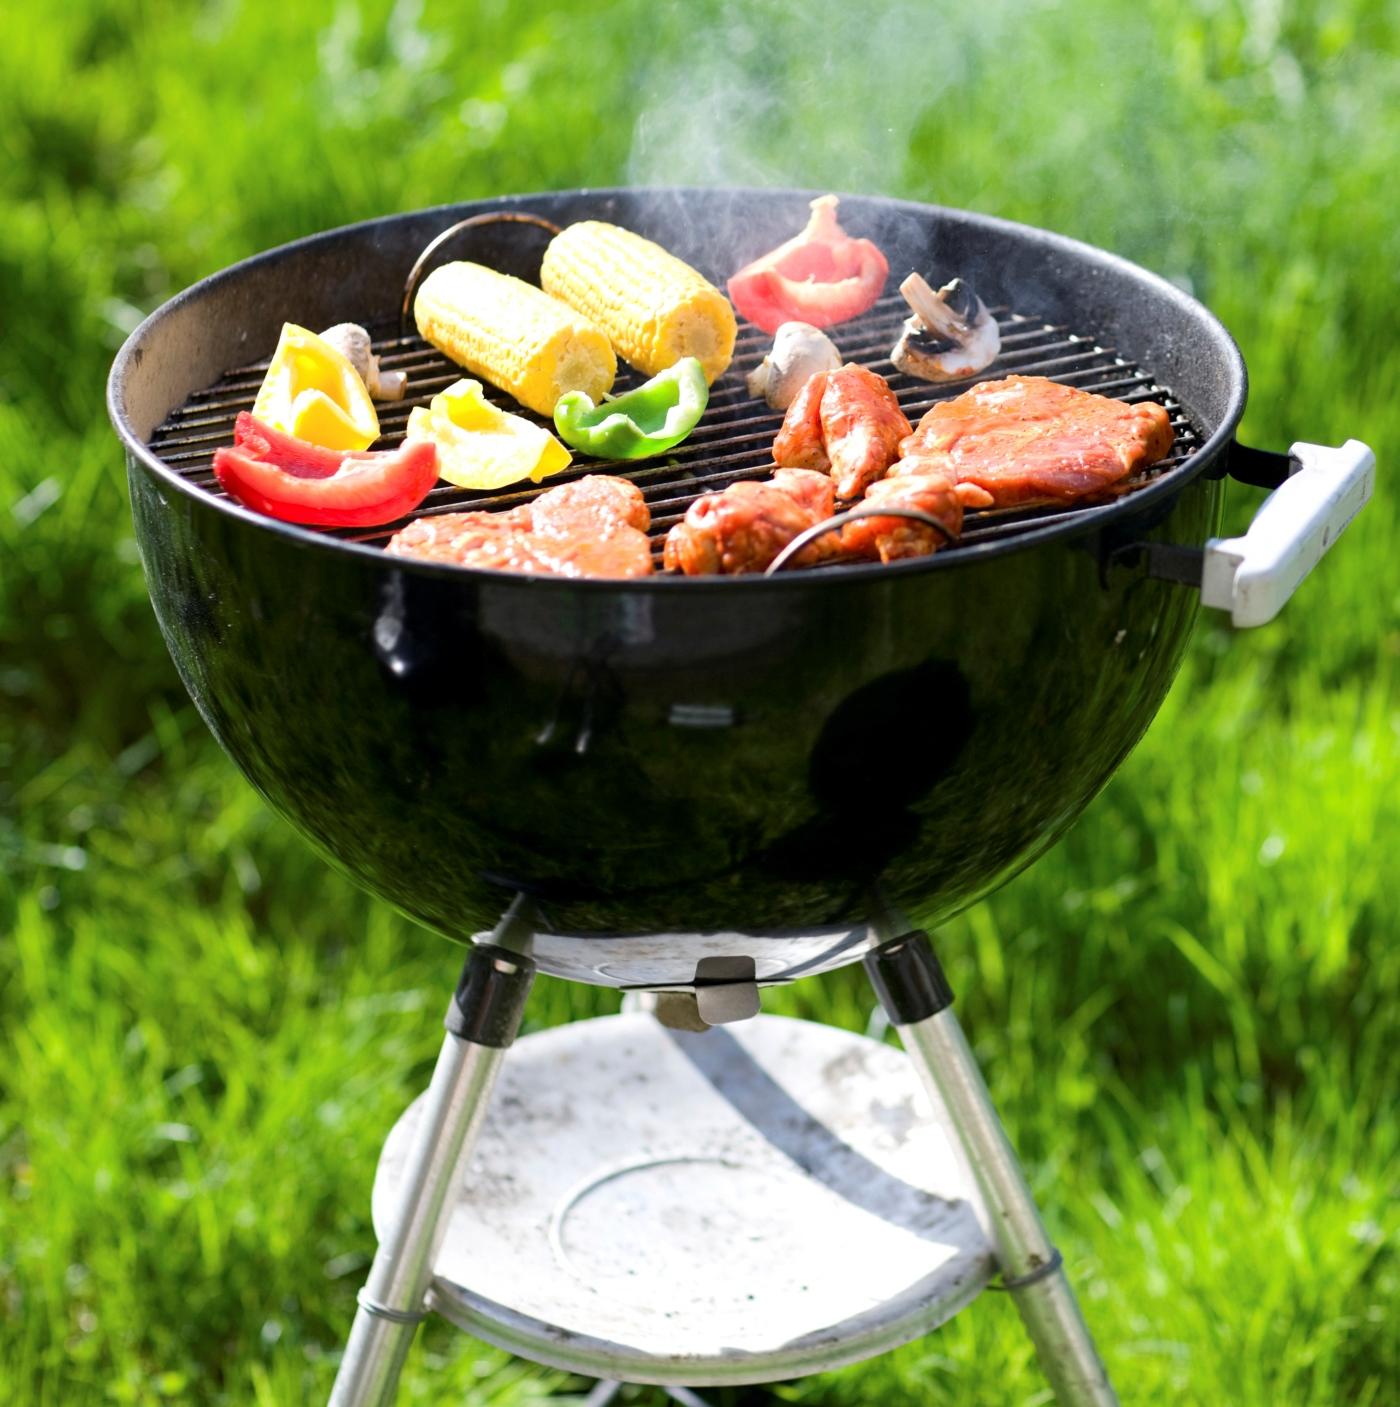 Charcoal grill with colorful food on it